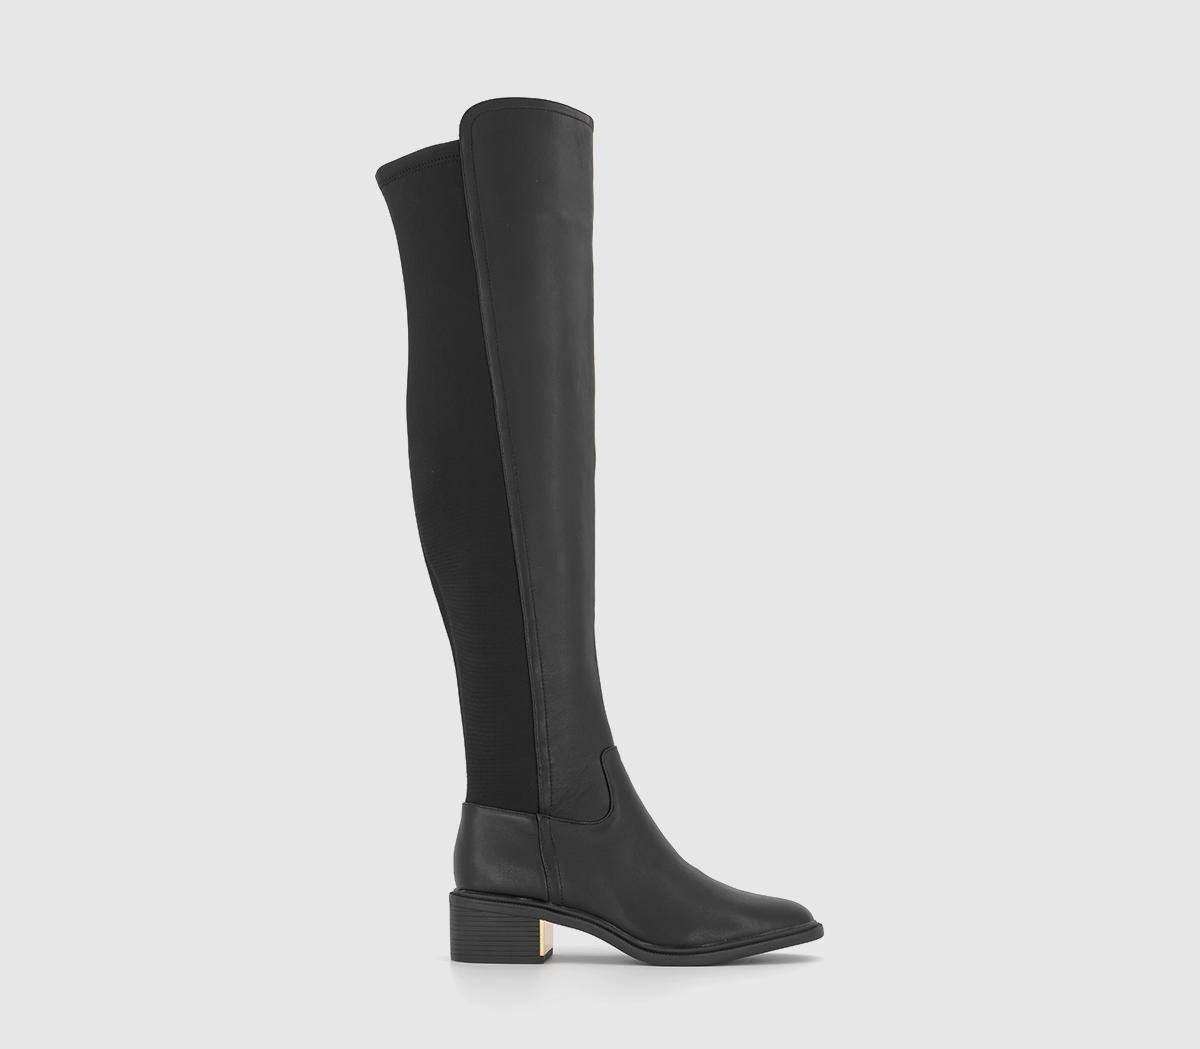 OFFICE Kelby Mixed Material Riding Boots Black Leather - Knee High Boots